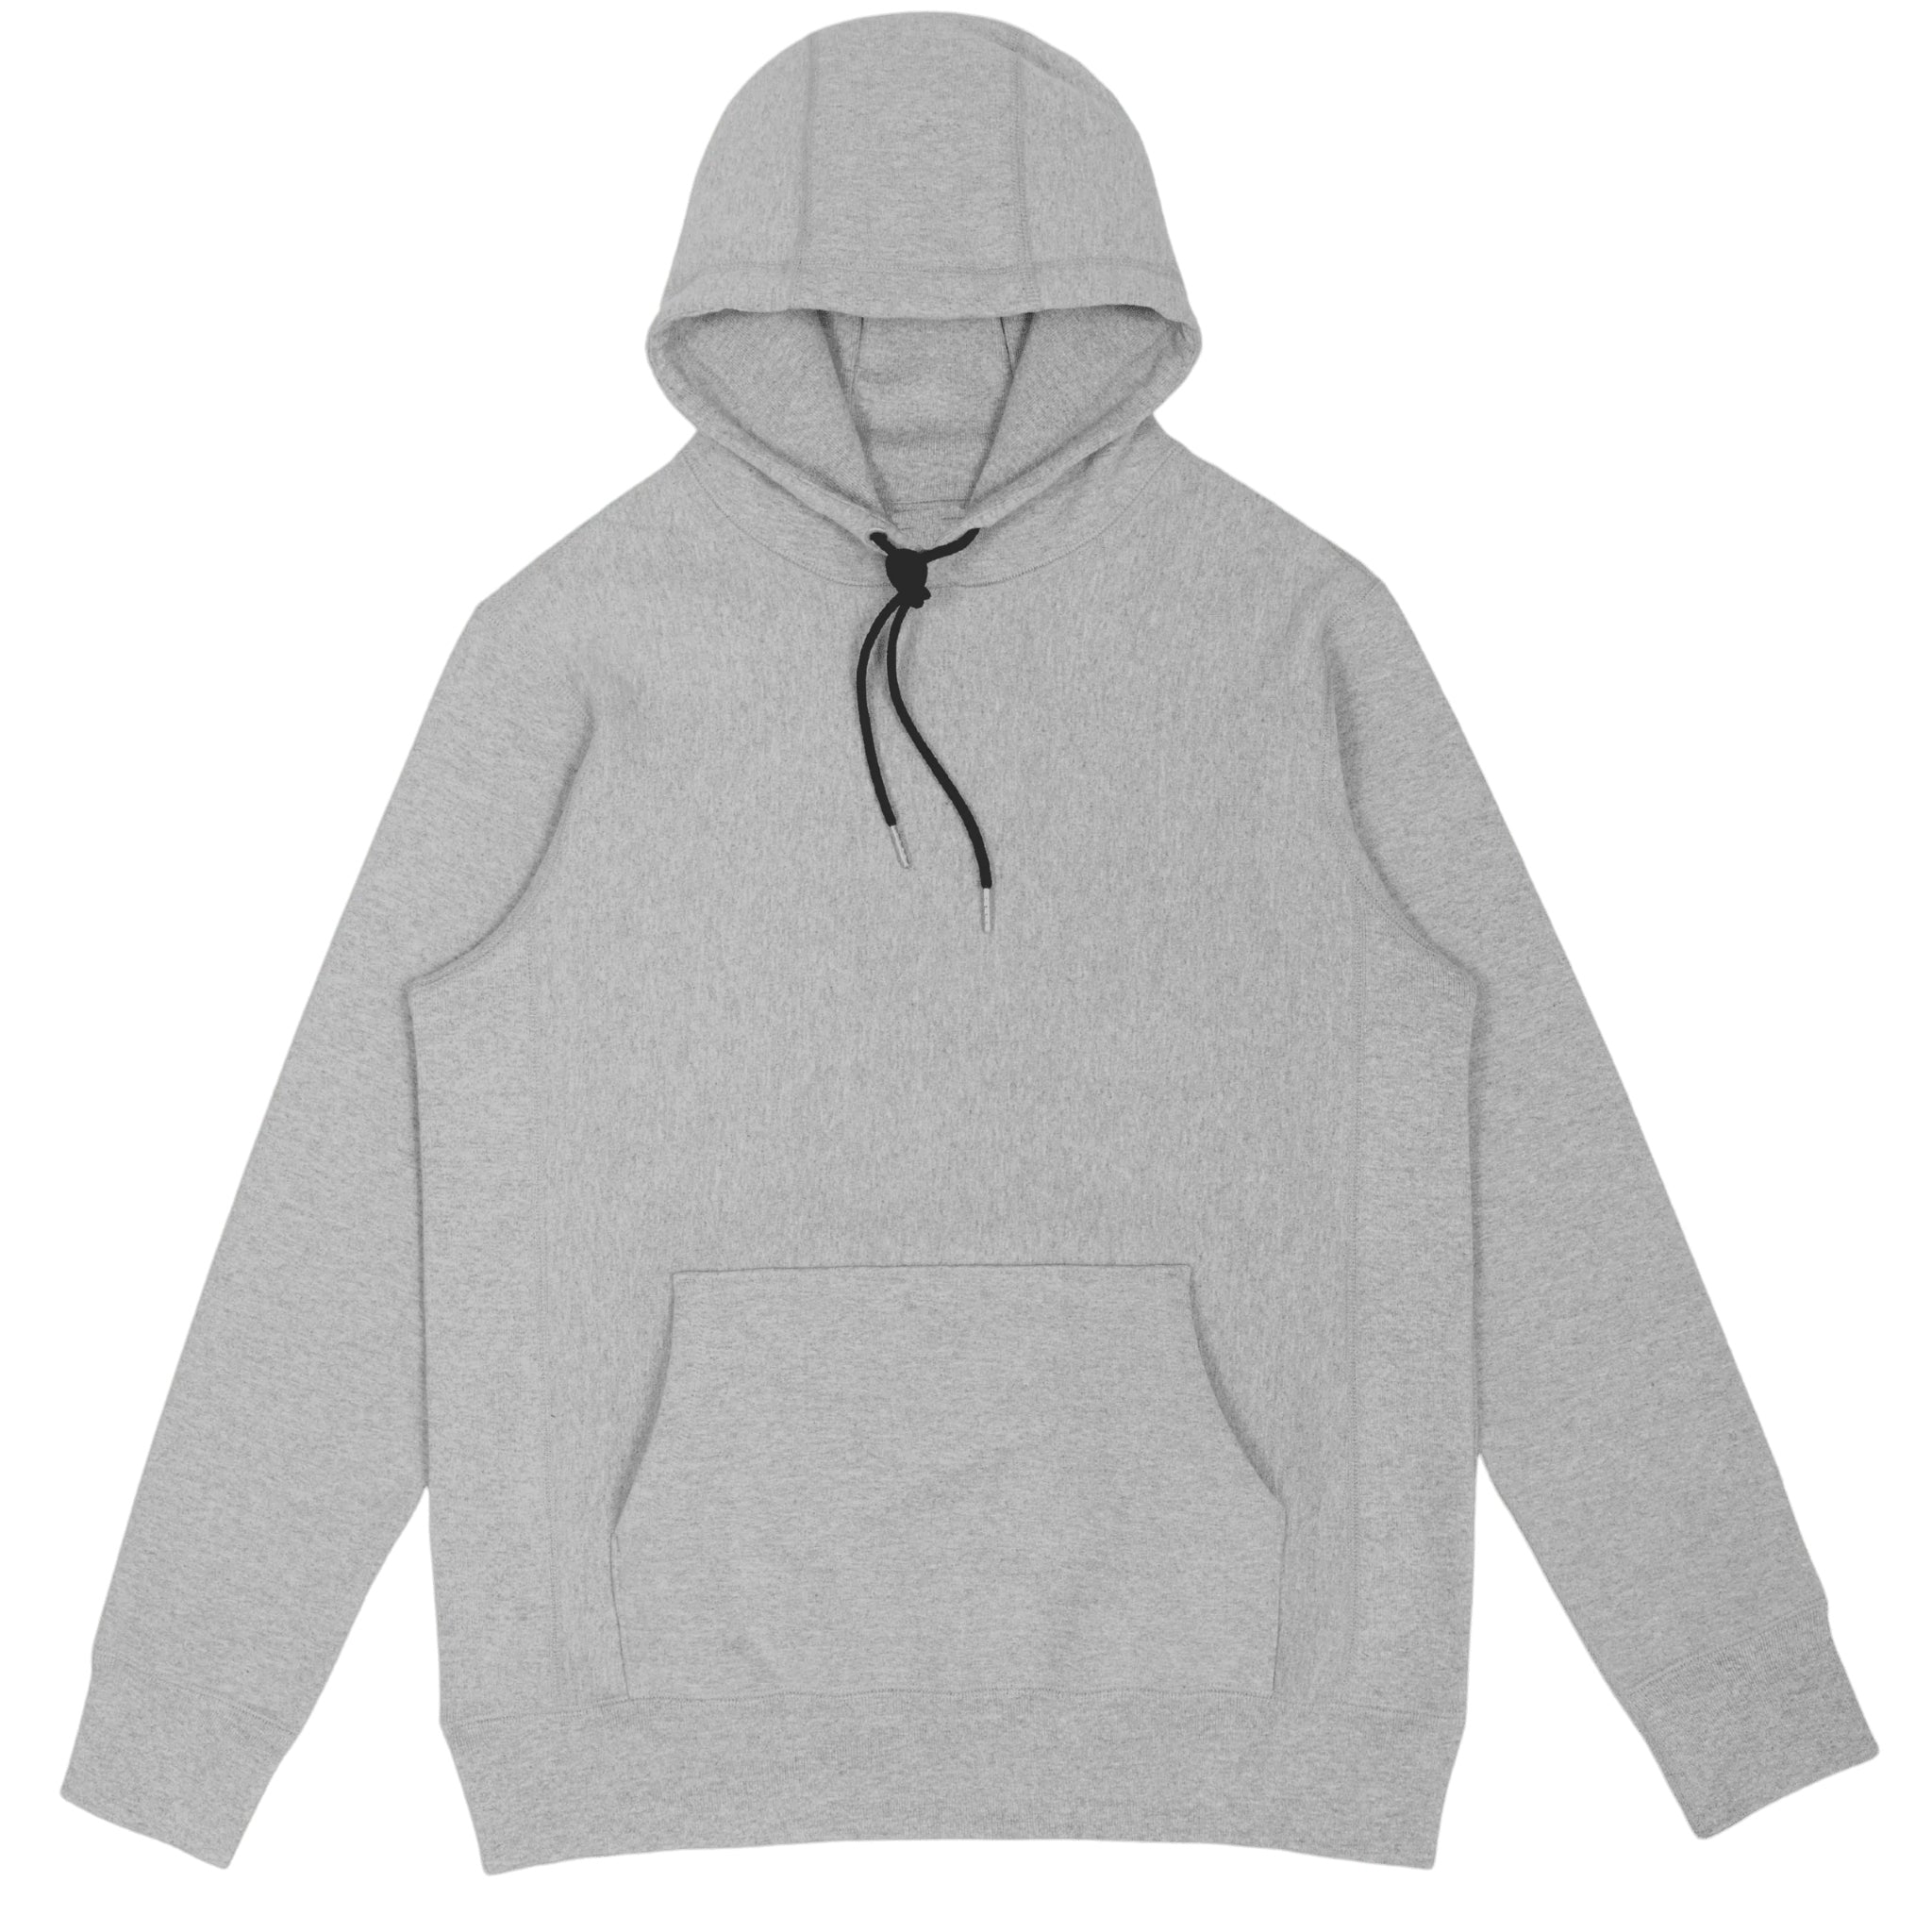 Heavyweight hoodie in grey cotton facing the camera on a white background.